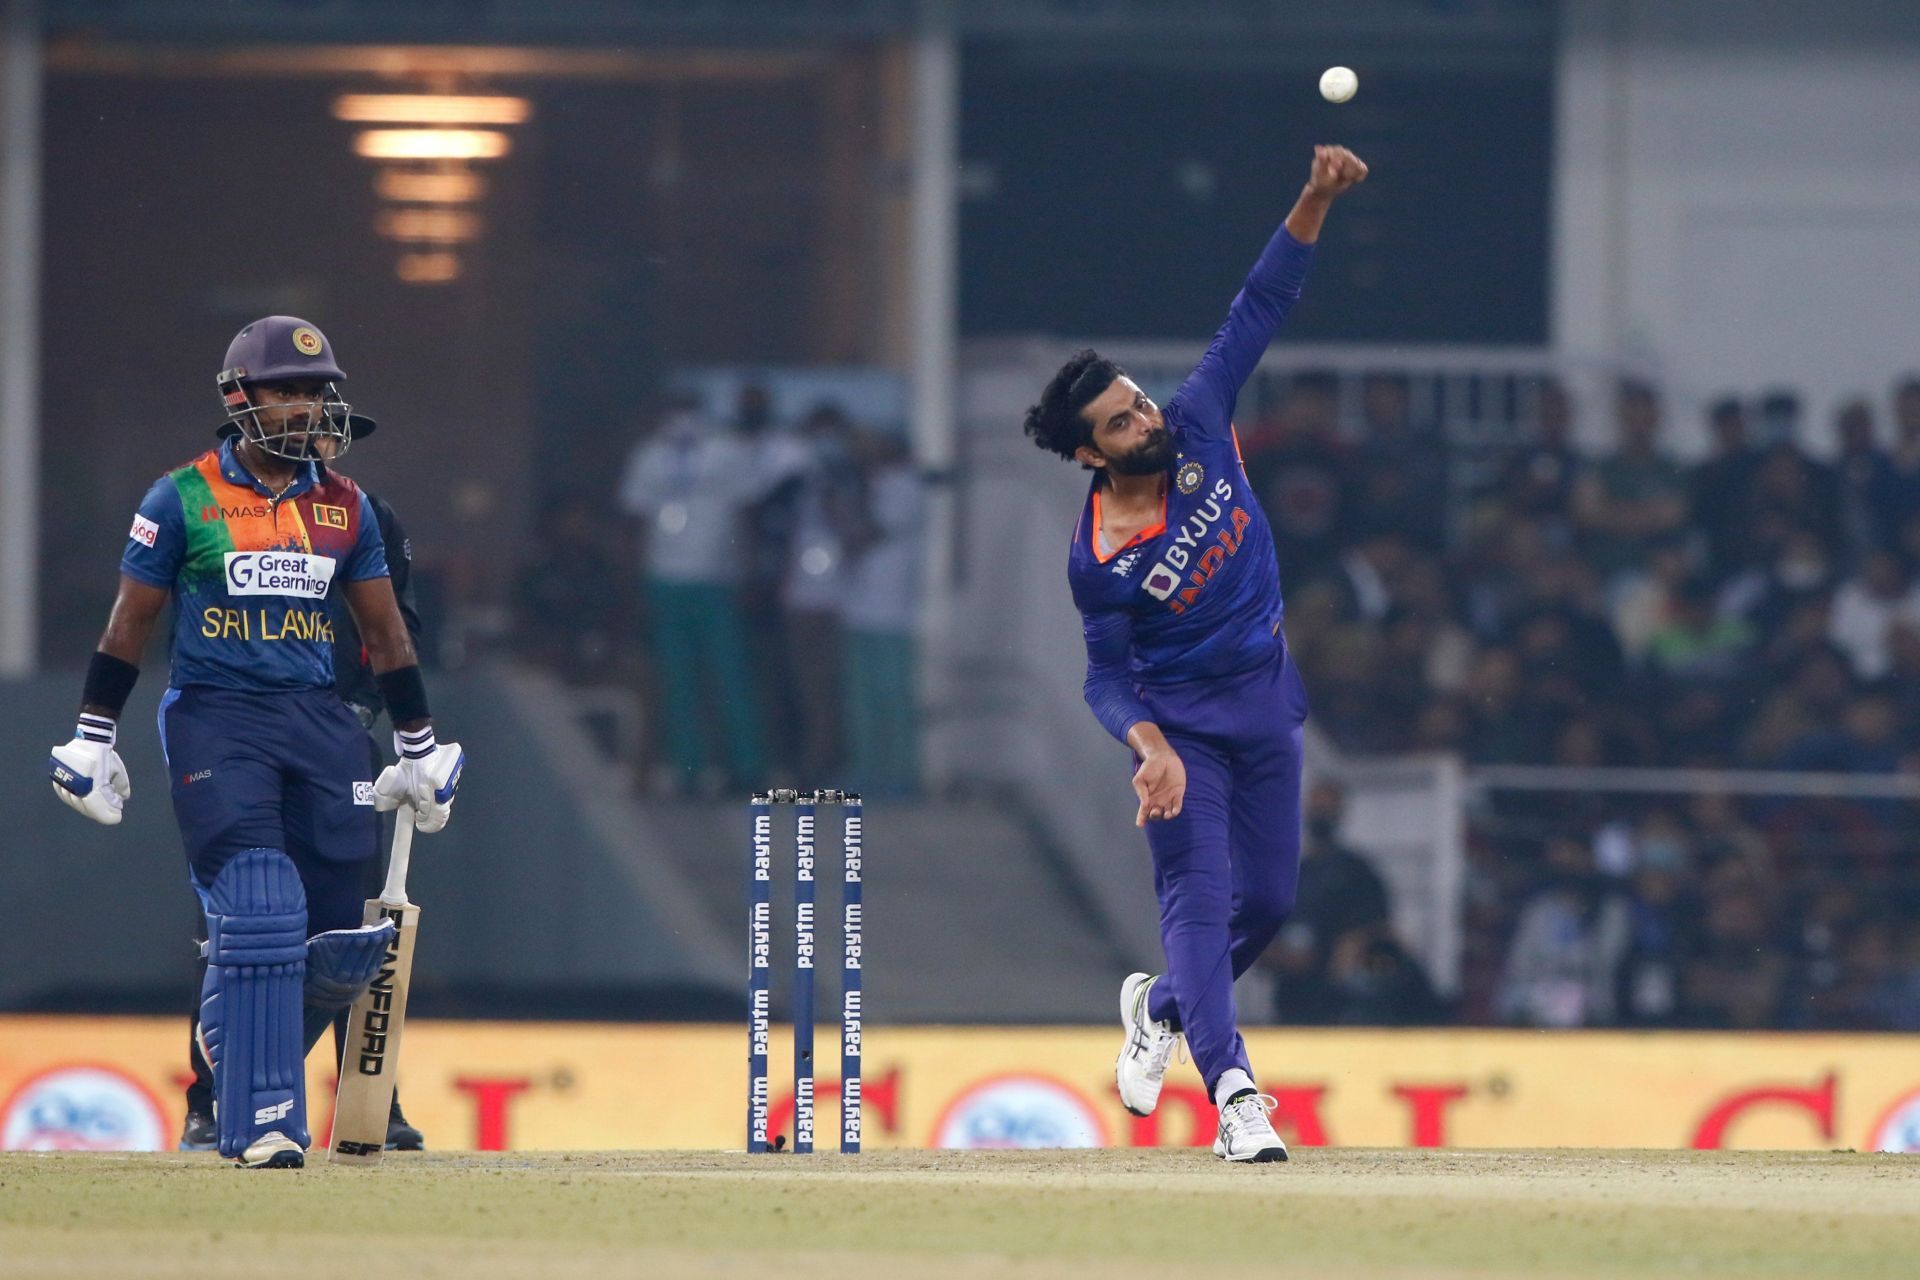  Ravindra Jadeja returned from injury to bowl a decent spell in the first T20I